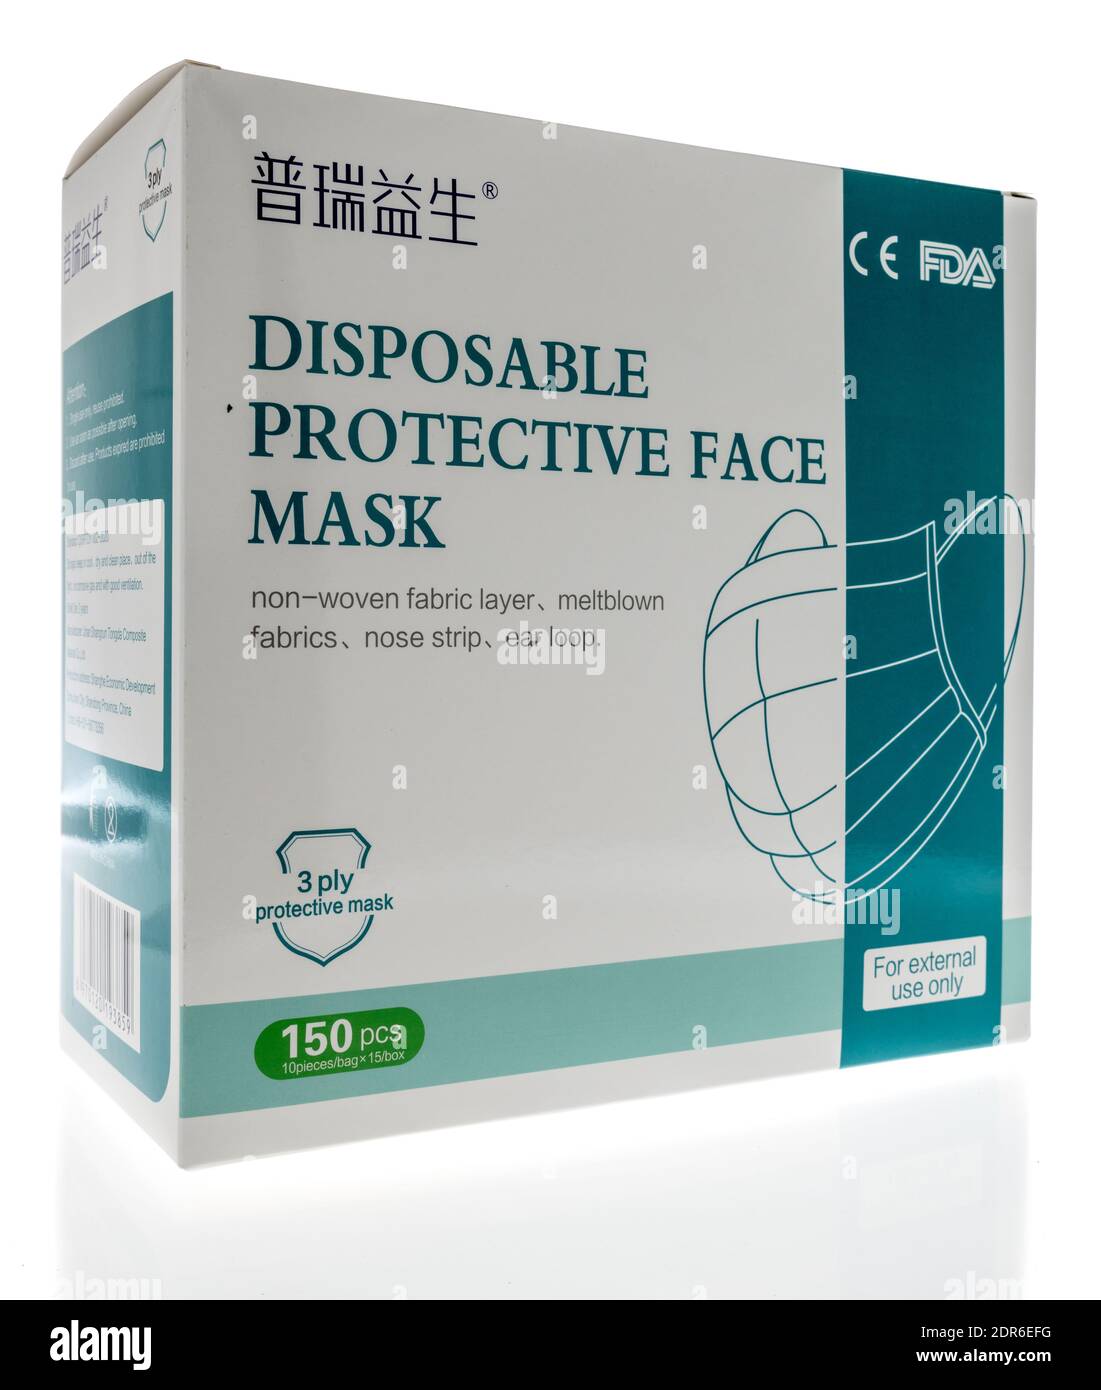 Winneconne, WI -17 December 2020: A package of FDA disposable protective face mask on an isolated background. Stock Photo